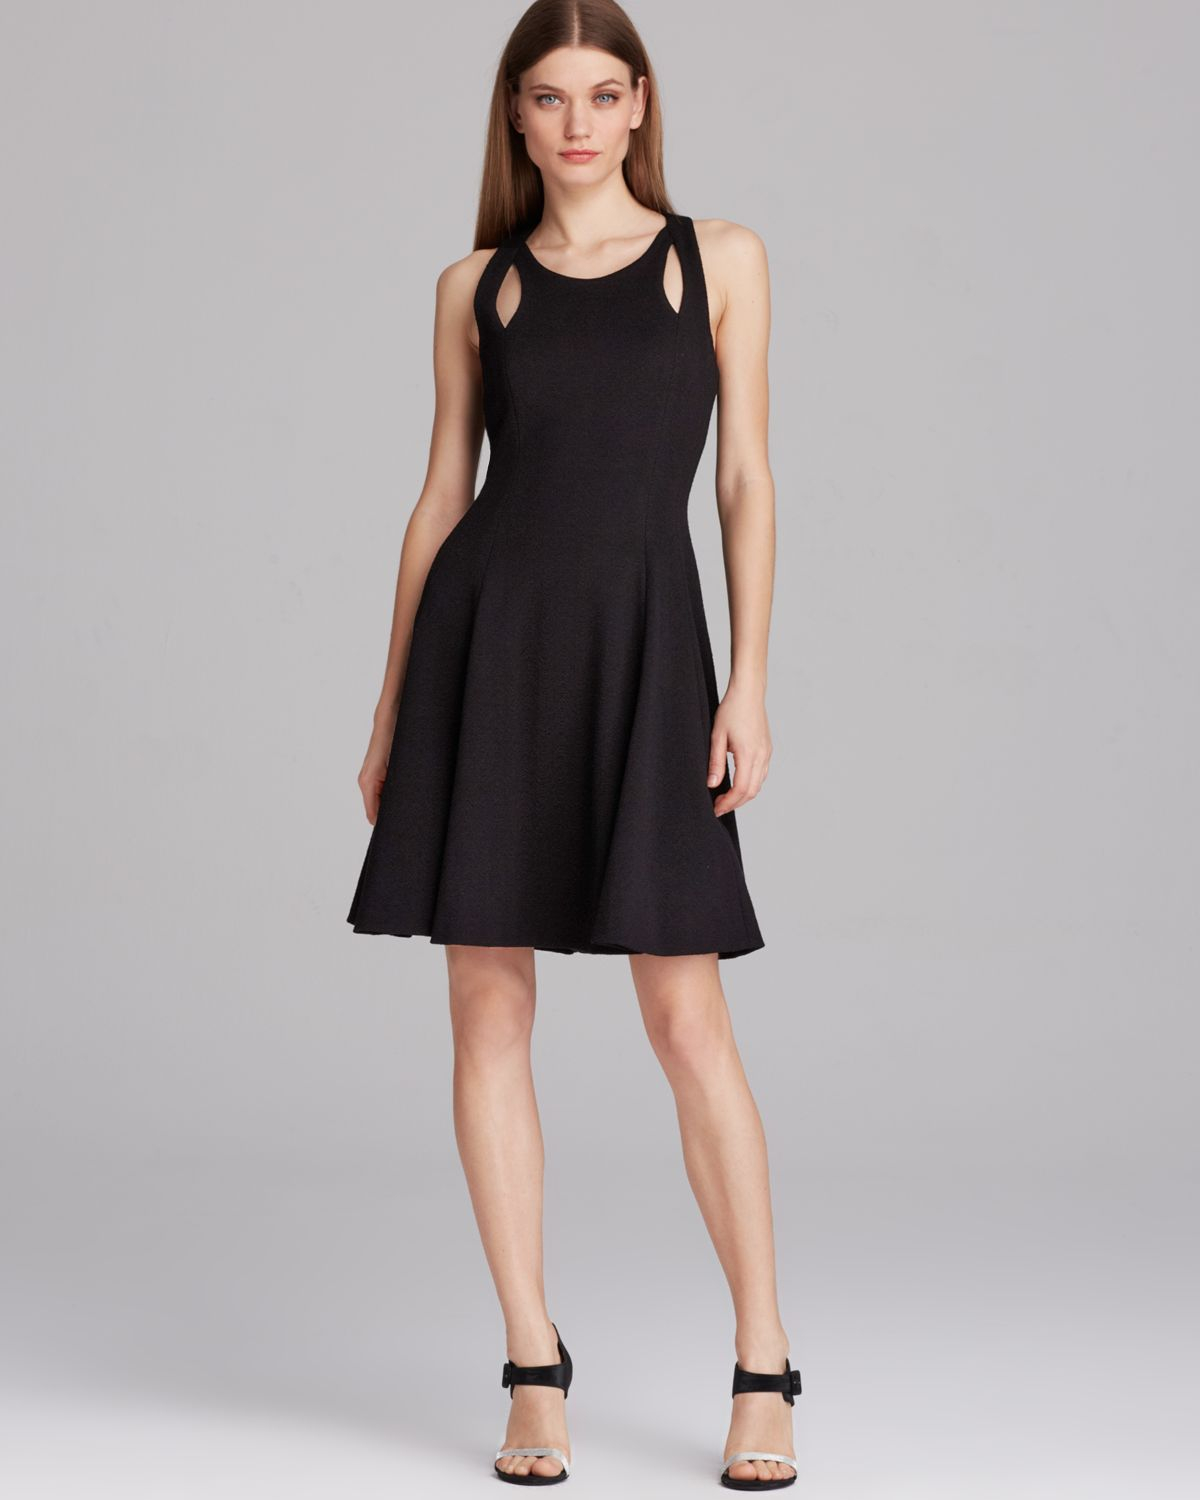 Vera wang Dress Sleeveless Cutout Back Fit and Flare in Black | Lyst